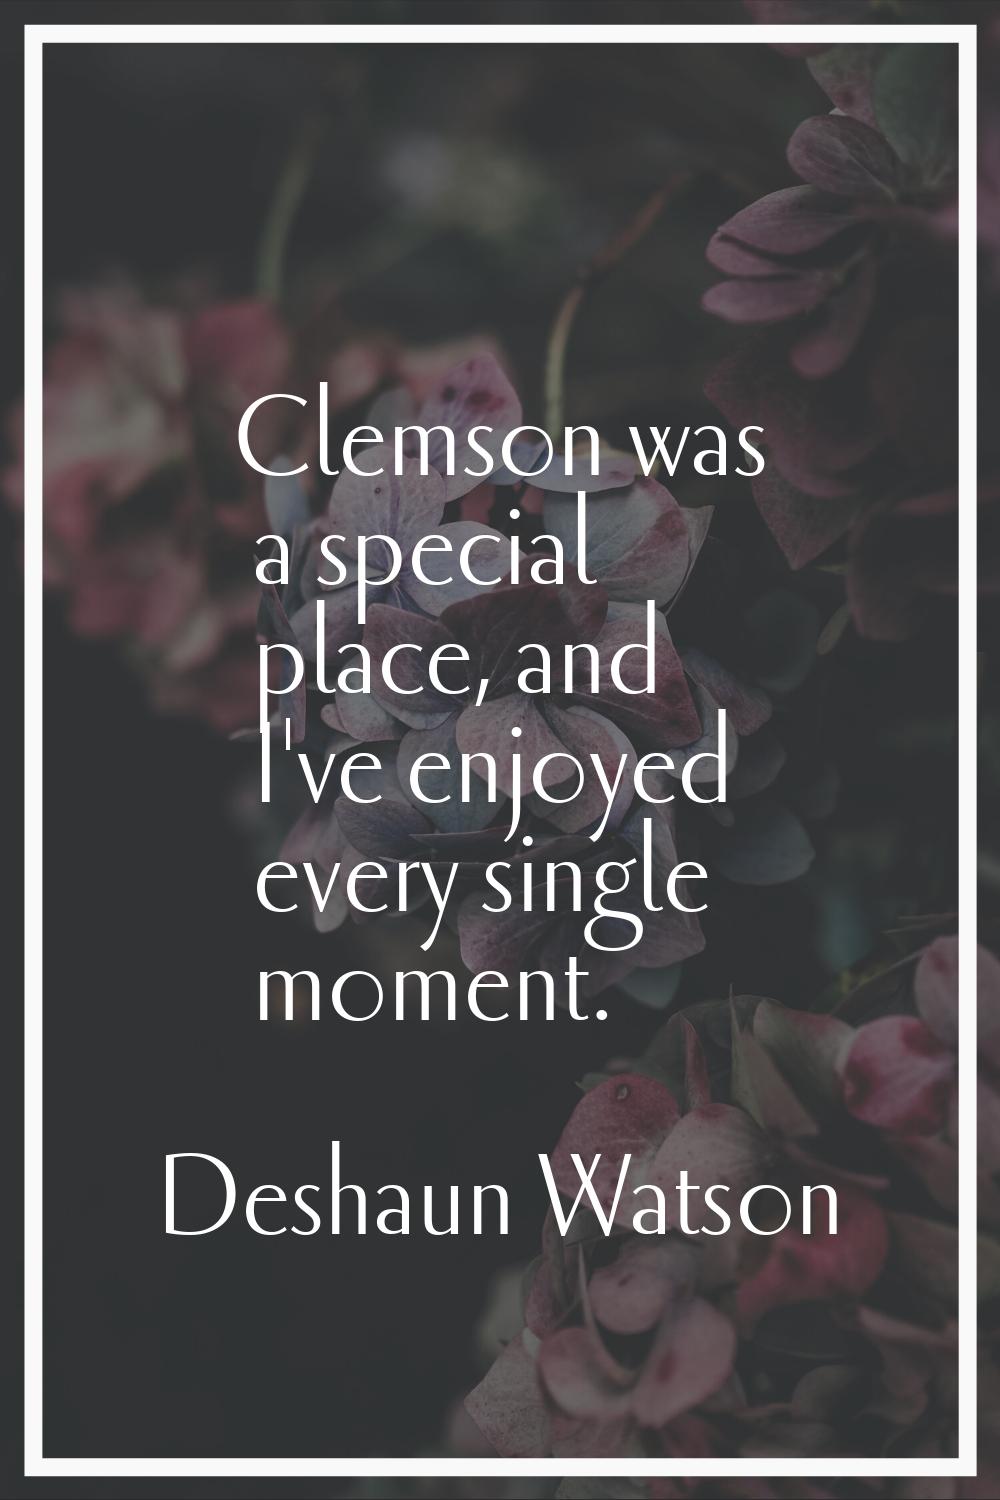 Clemson was a special place, and I've enjoyed every single moment.